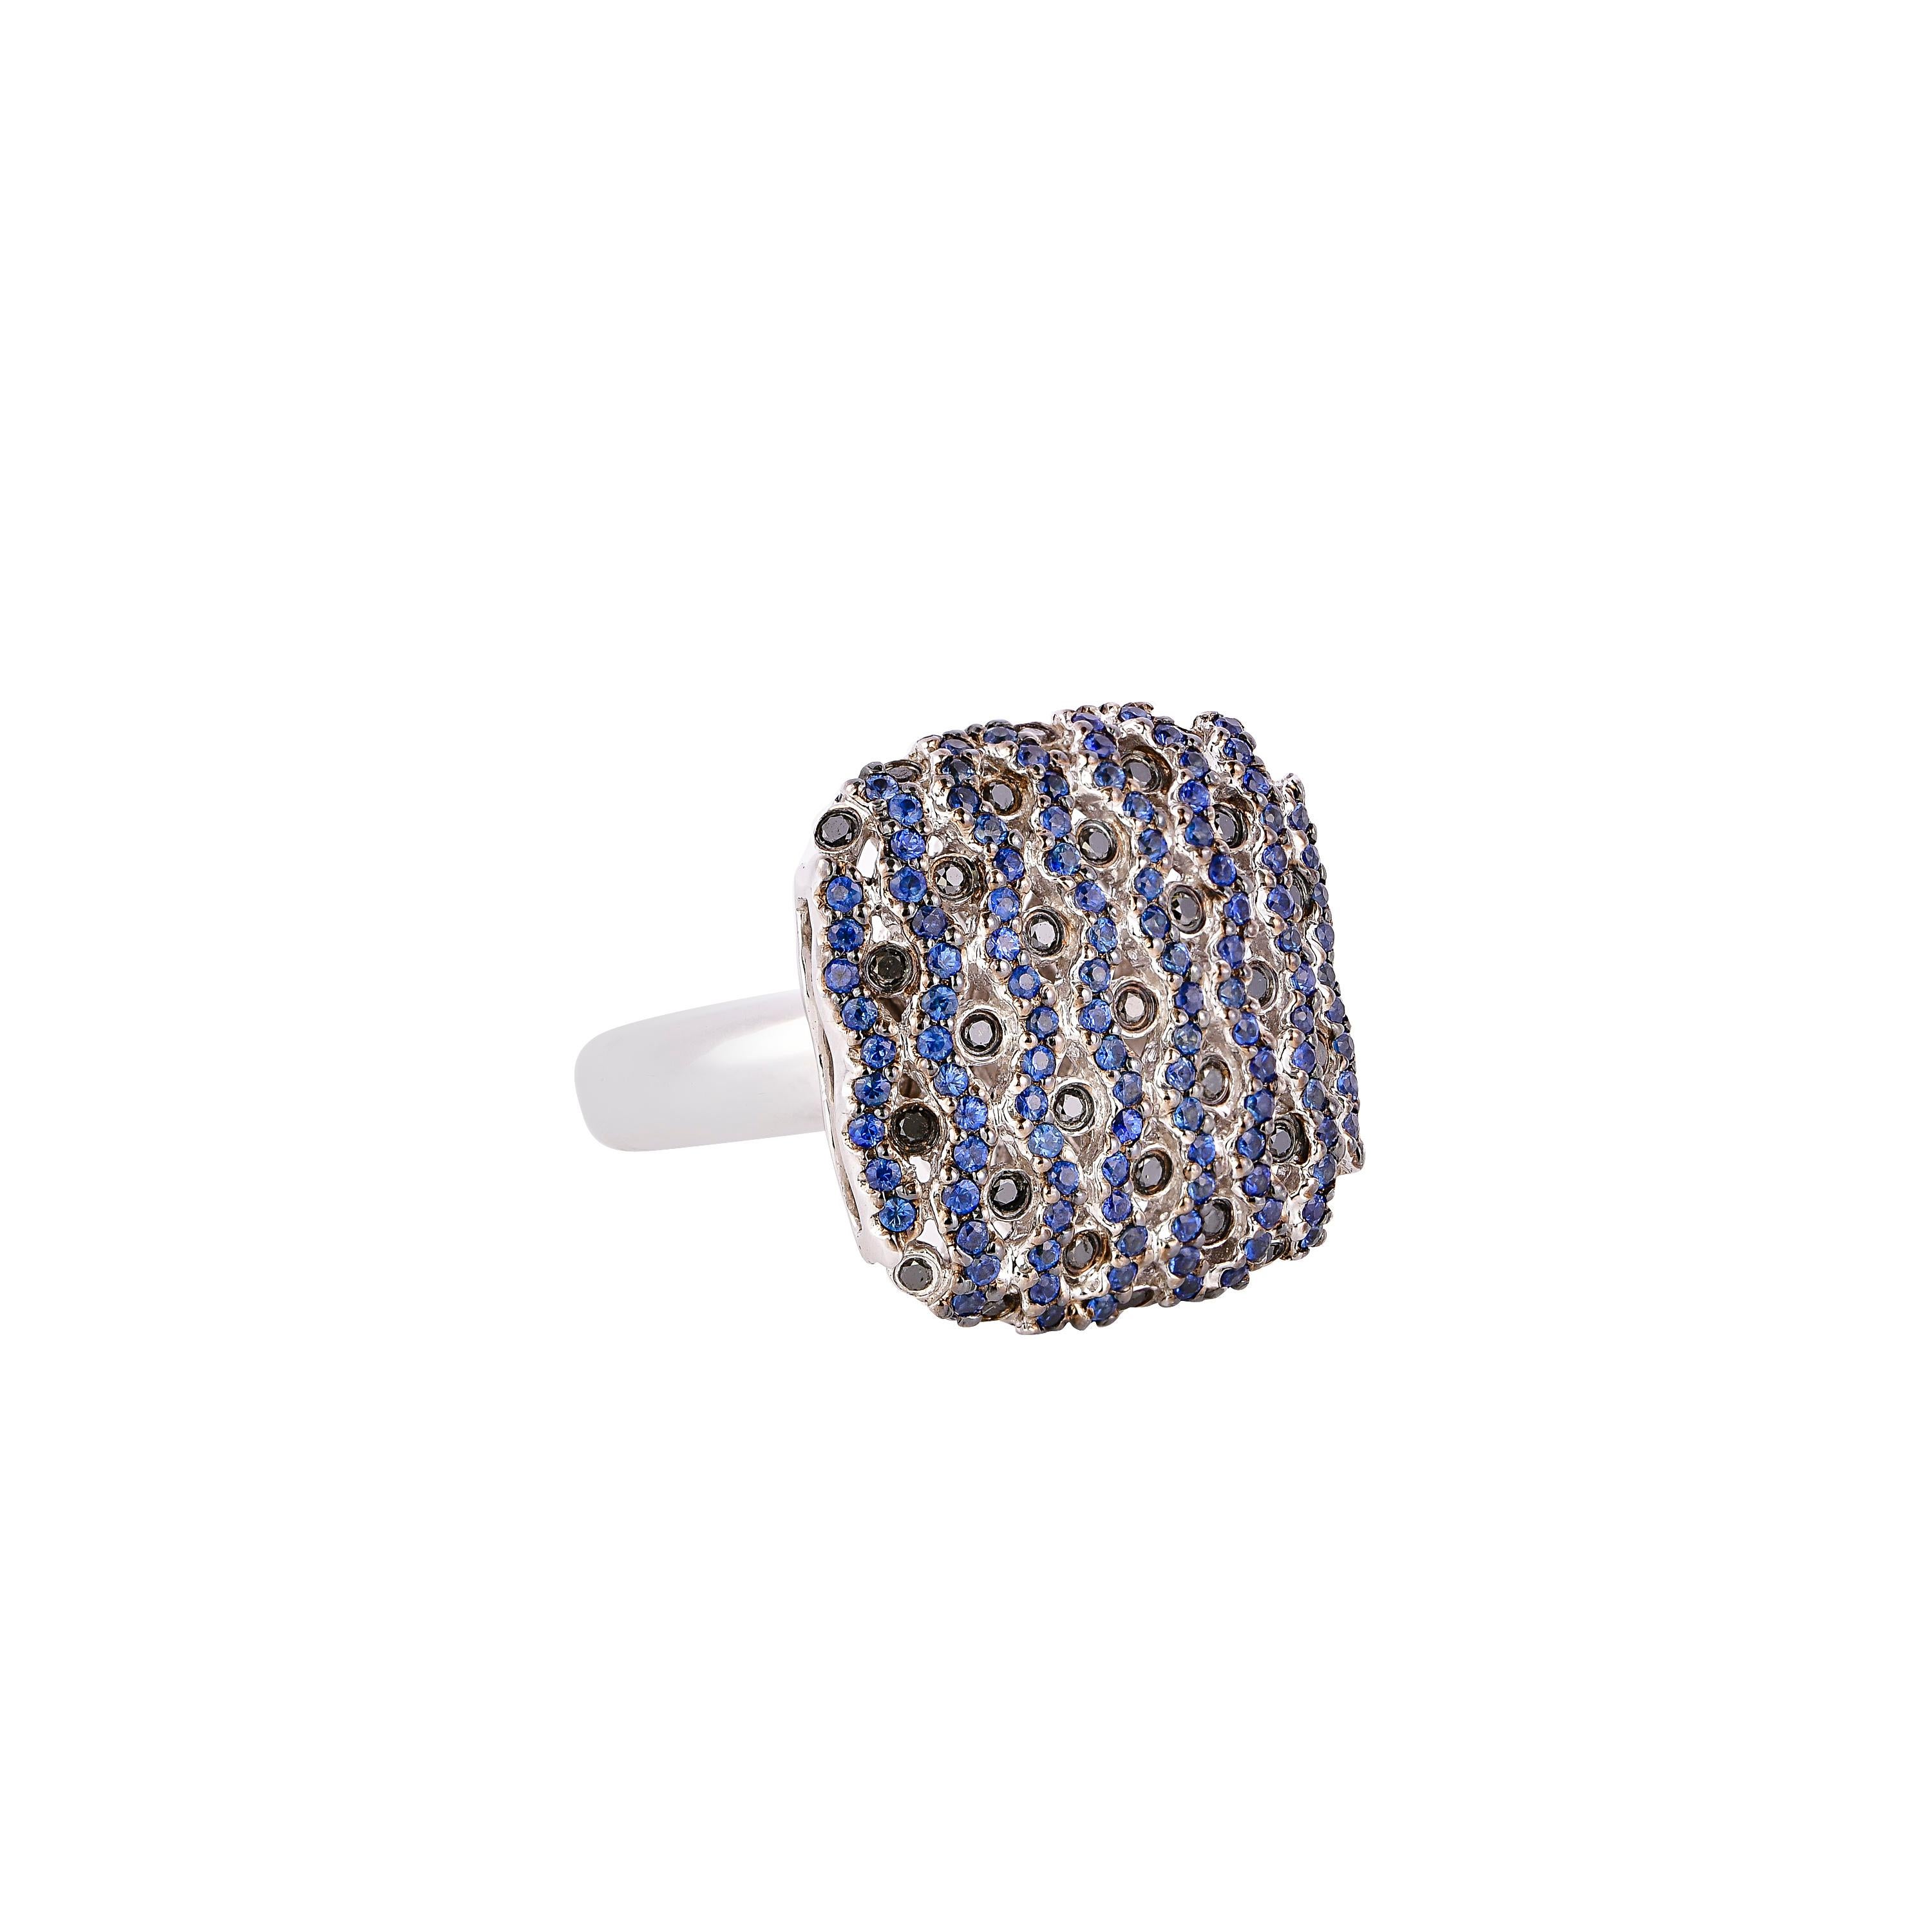 Feel the waves with these unique cocktail rings with a 'wavey' design. This ring incorporates a unique pairing of color gems with different settings of pave and bezel to add some sparkle to your ring stack. 

Fancy blue sapphire (pave) and black